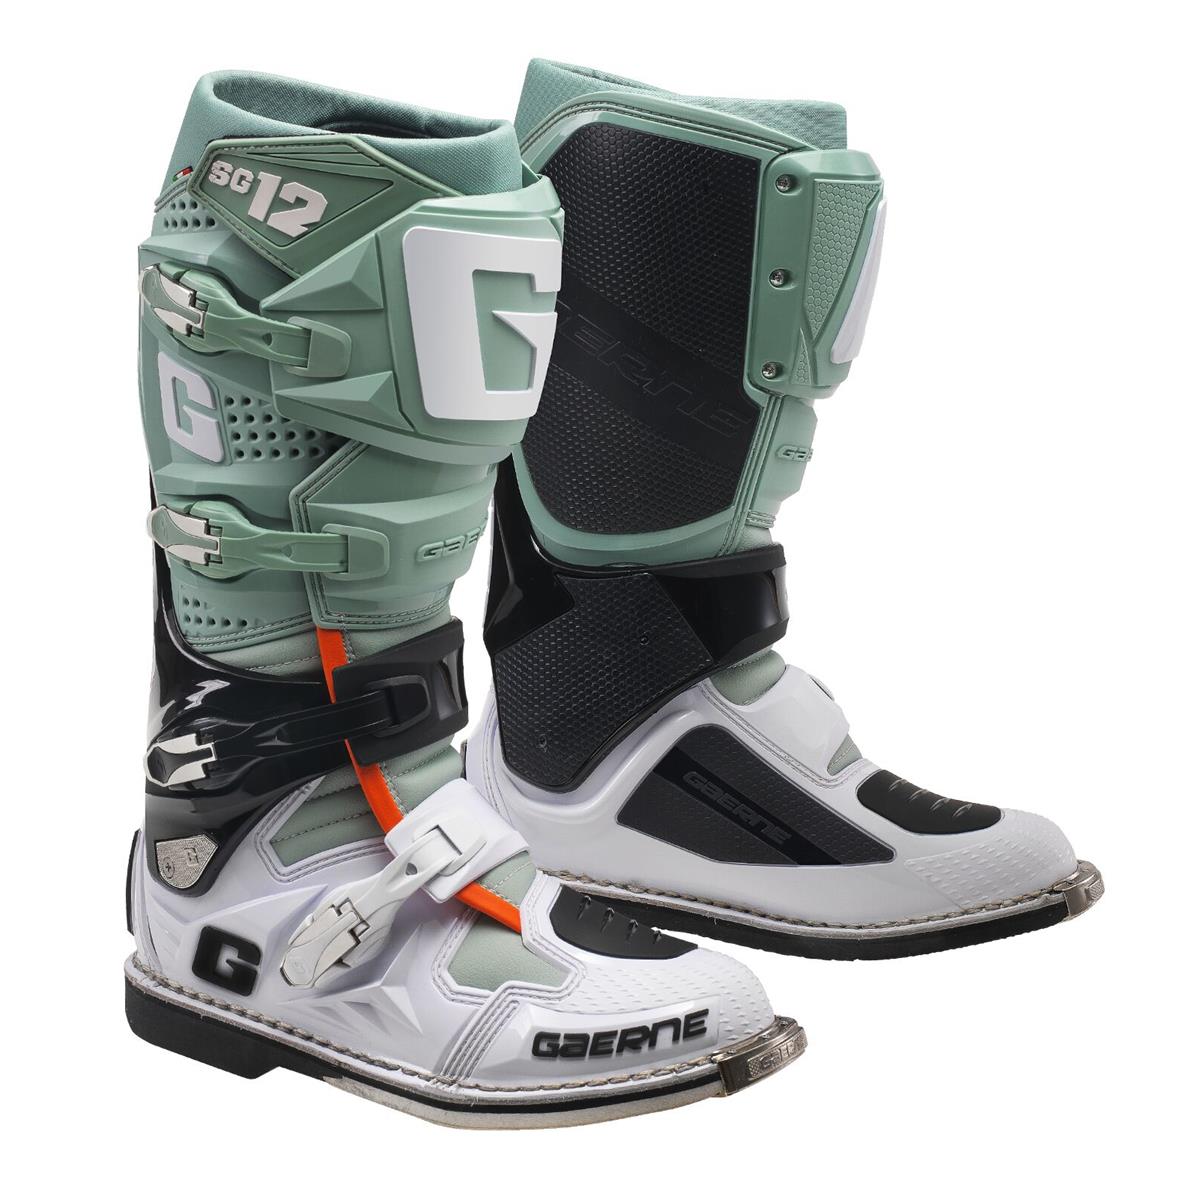 Gaerne MX Boots SG 12 Paste - Special Edition